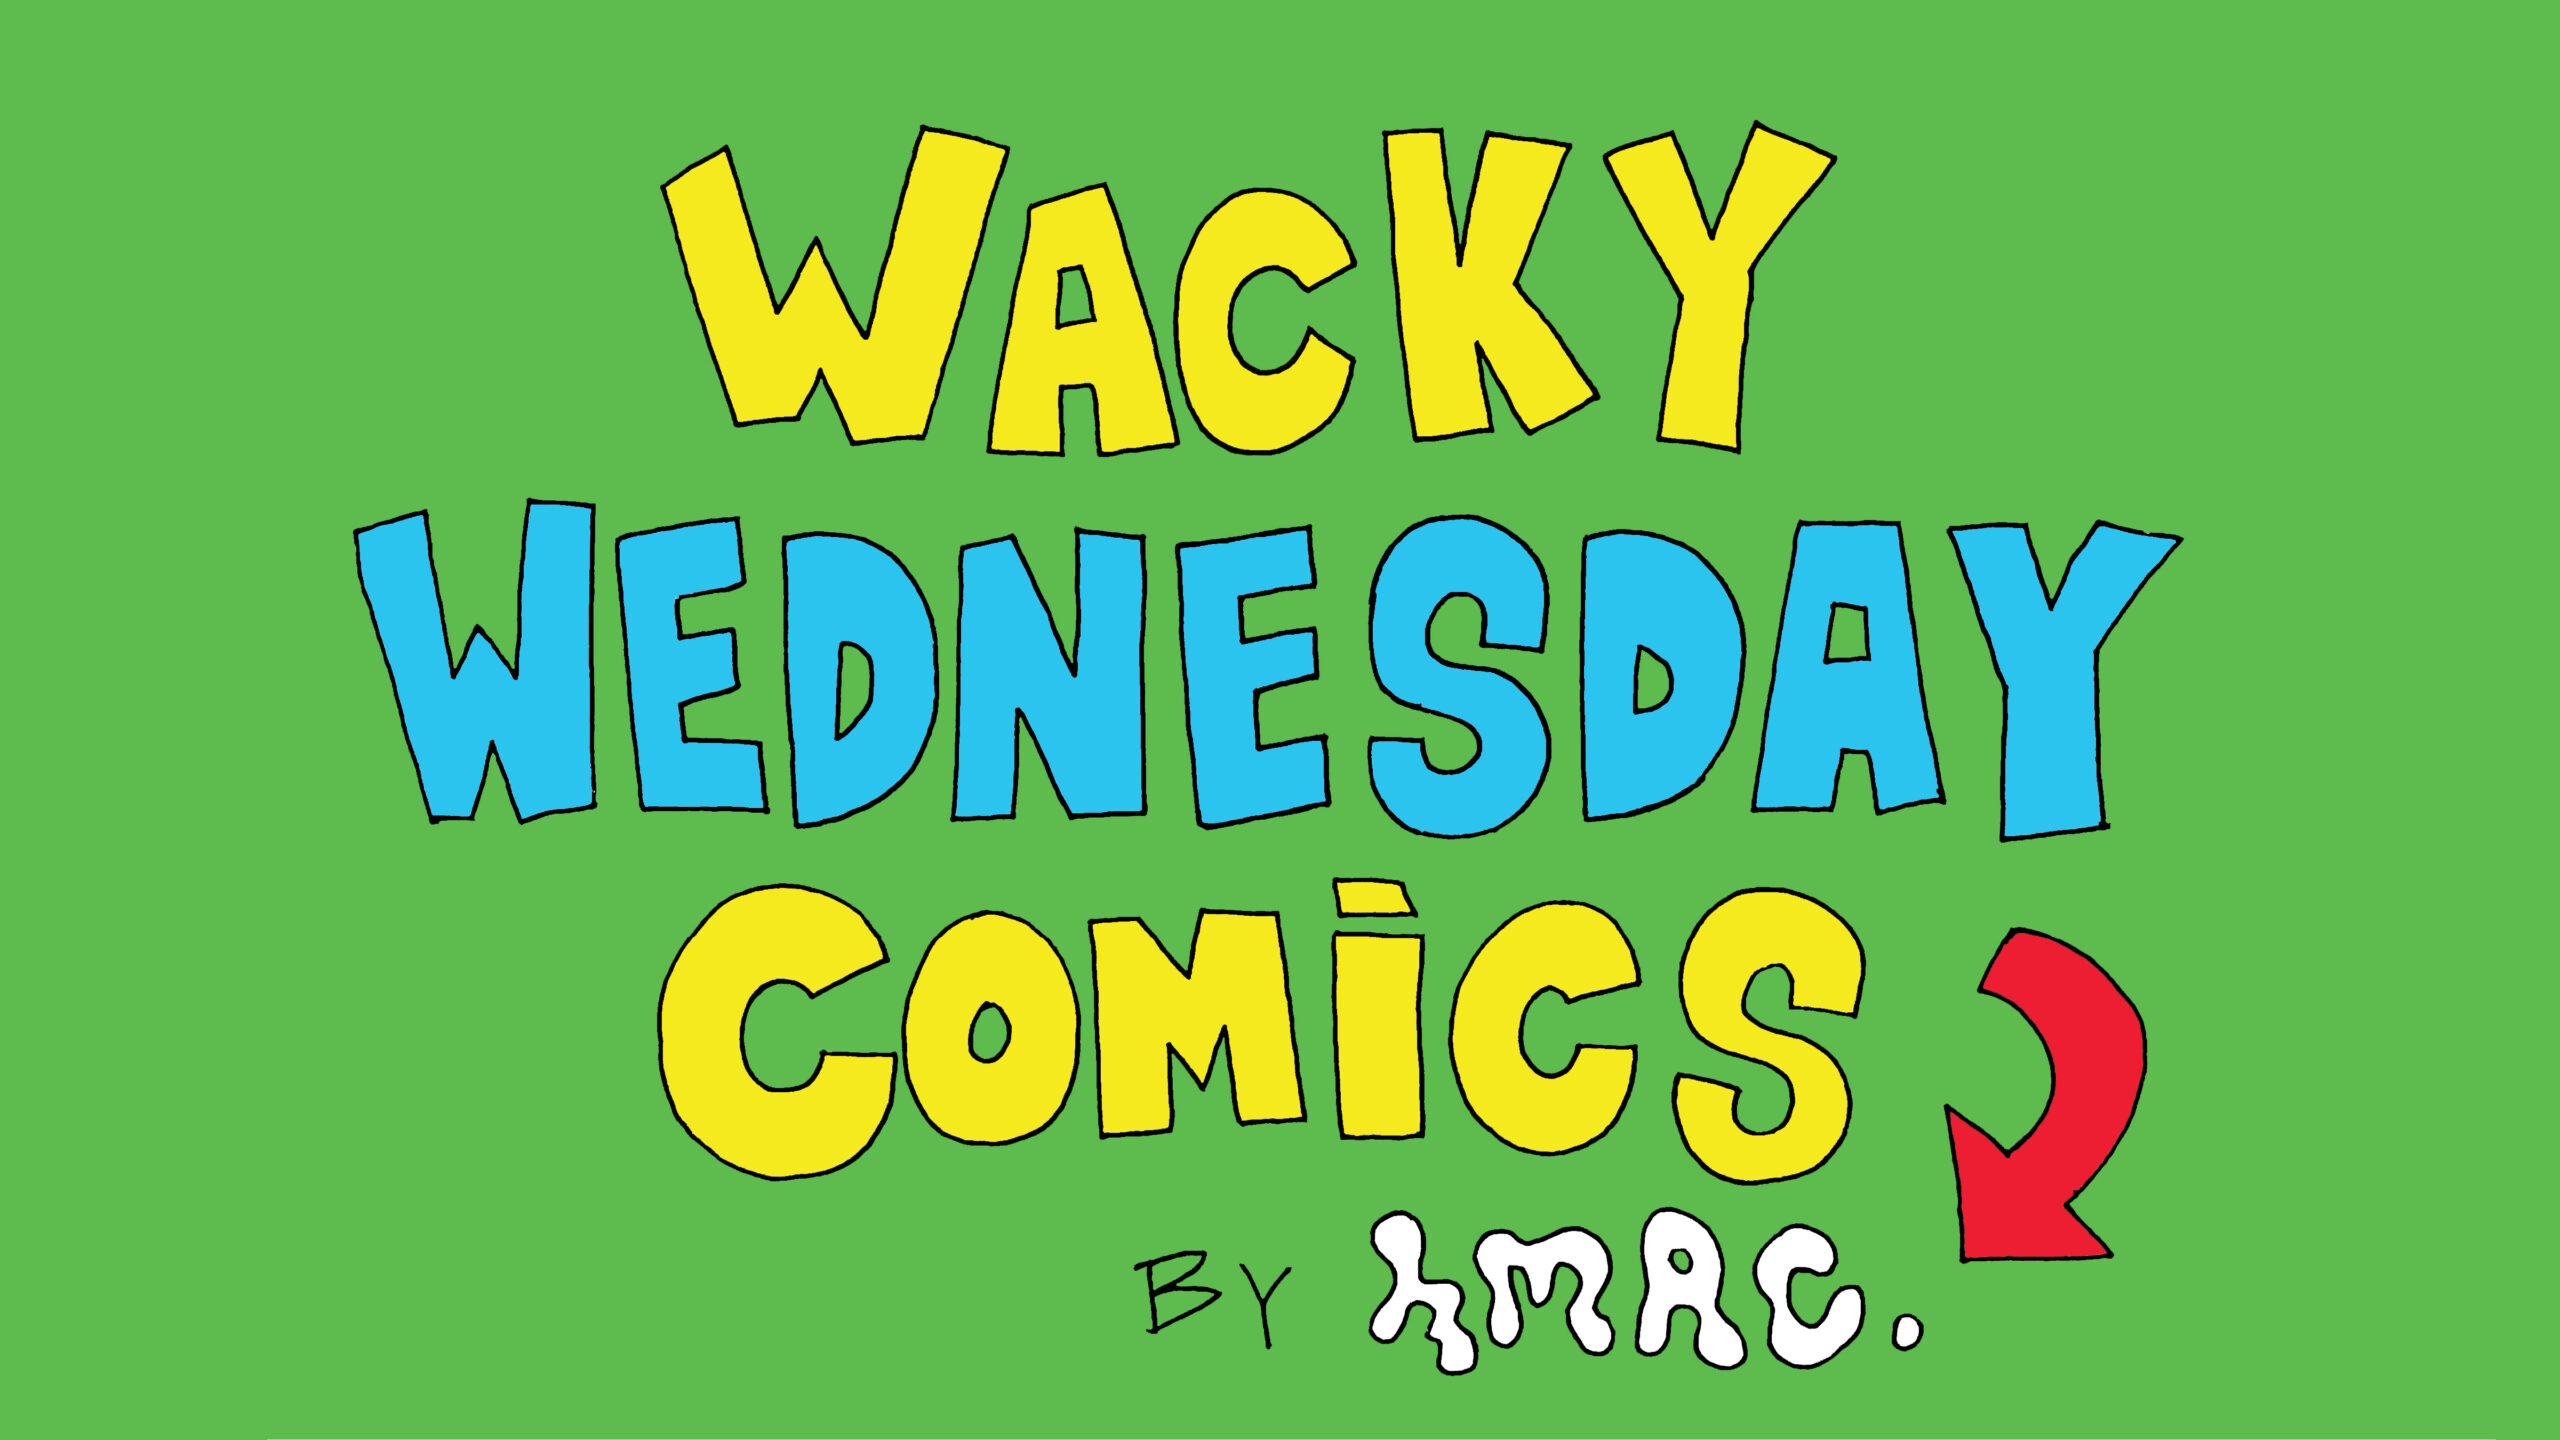 Text in Yellow and Blue saying "Wacky Wednesday Comics by HMAC".